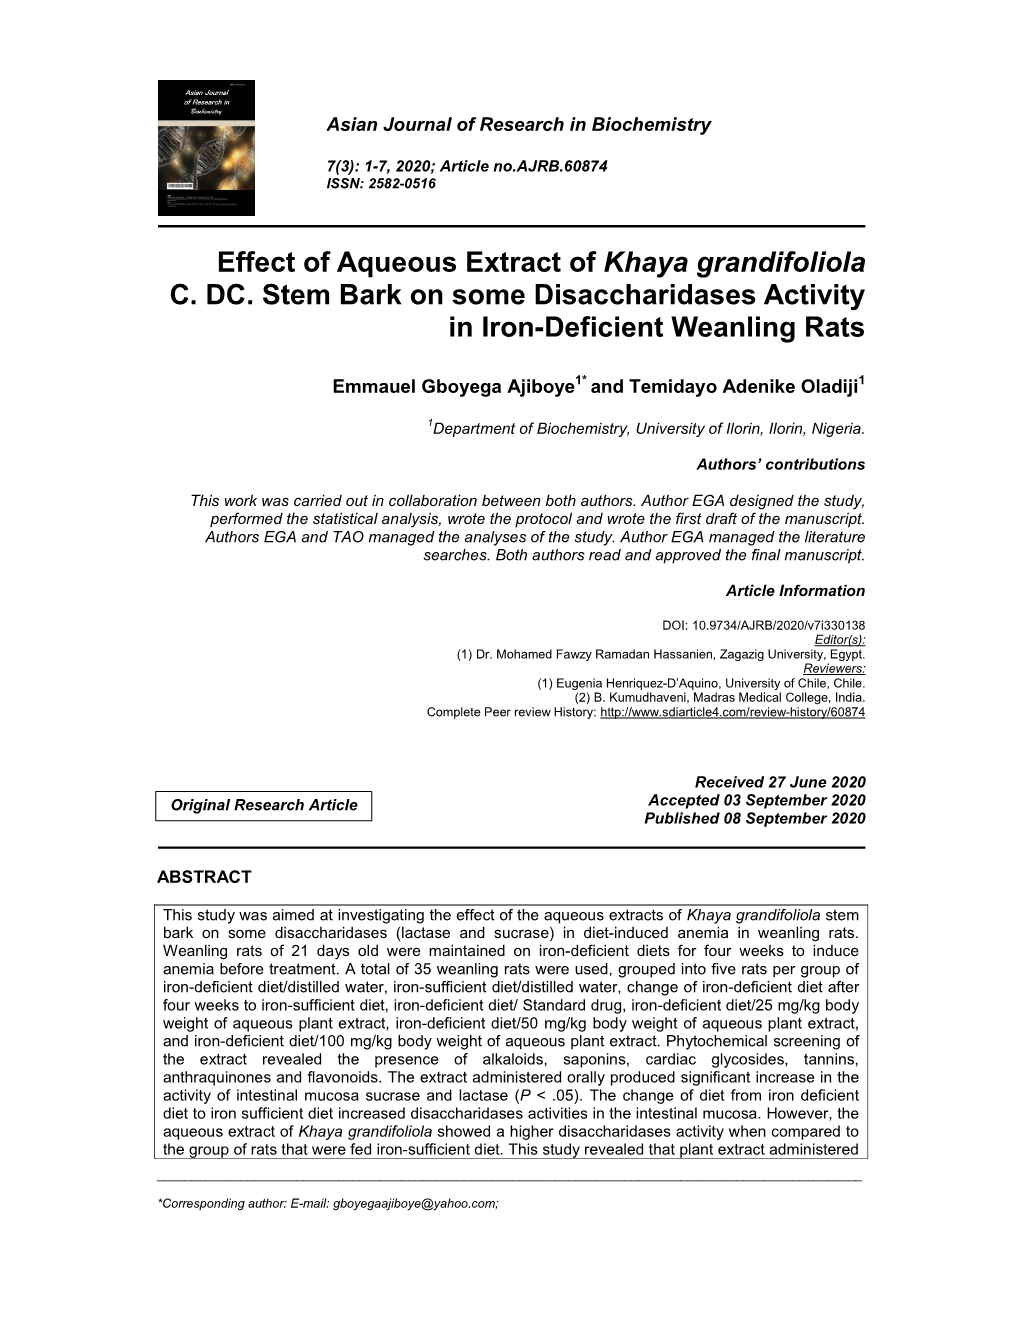 Effect of Aqueous Extract of Khaya Grandifoliola C. DC. Stem Bark on Some Disaccharidases Activity in Iron-Deficient Weanling Rats